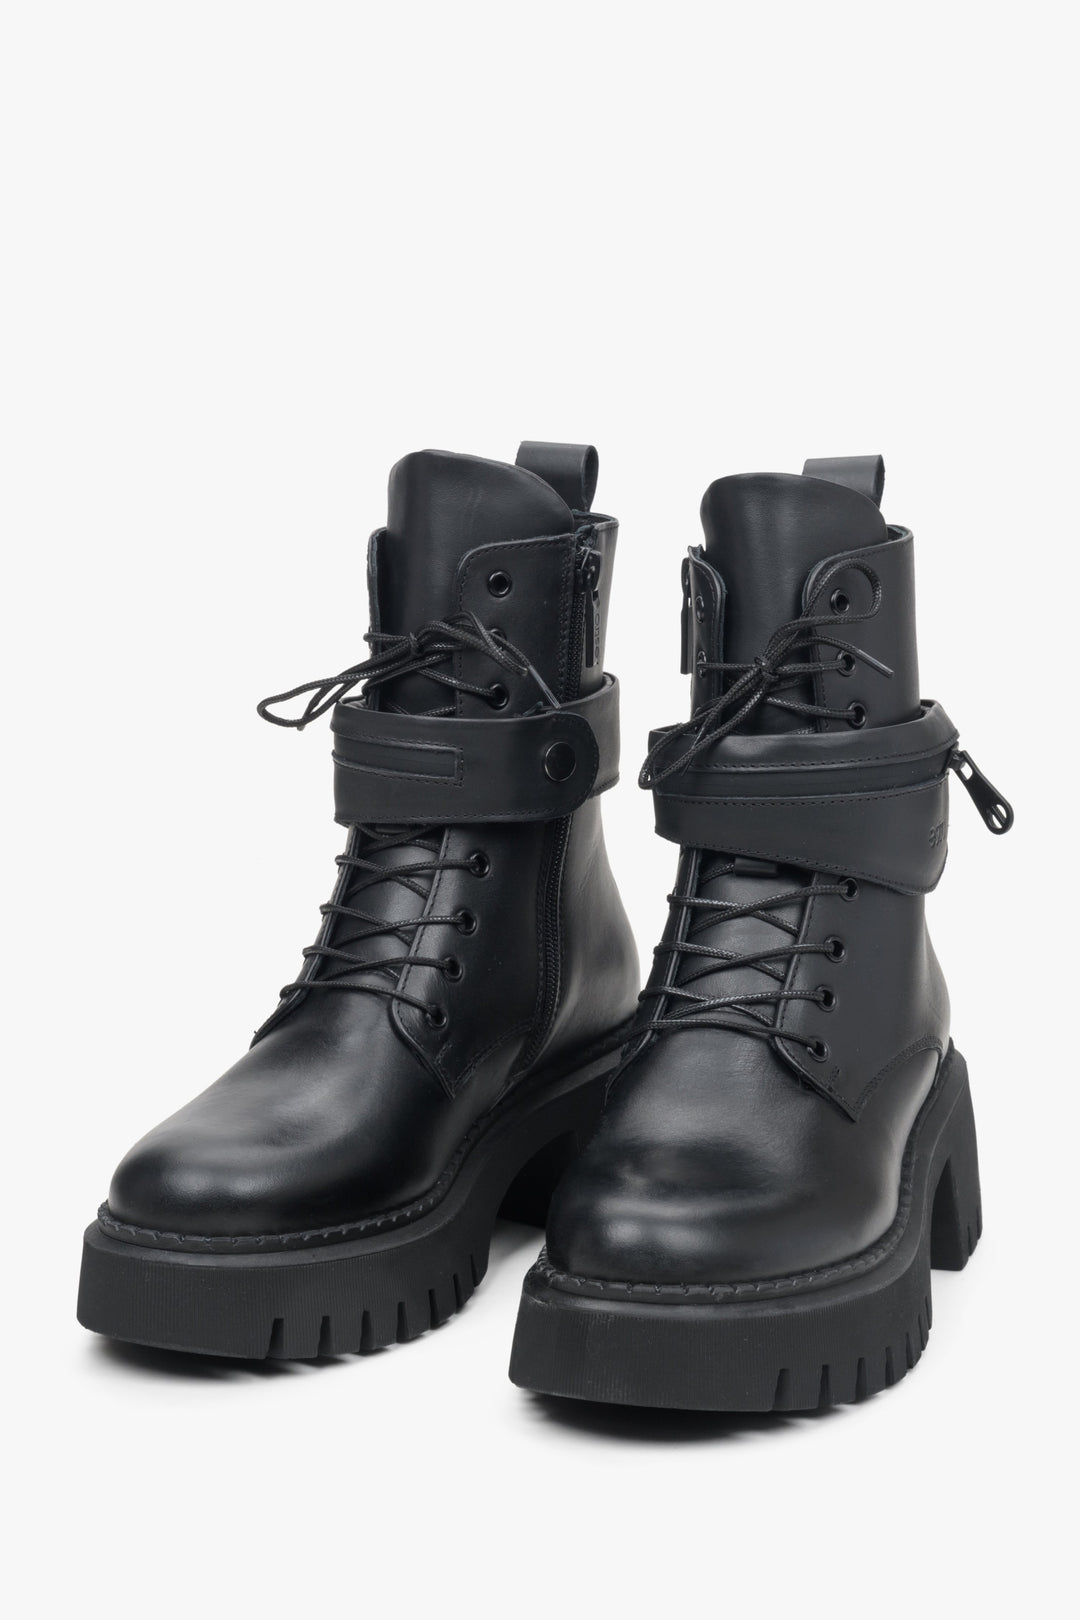 Women's black leather boots with a decorative strap and laces.